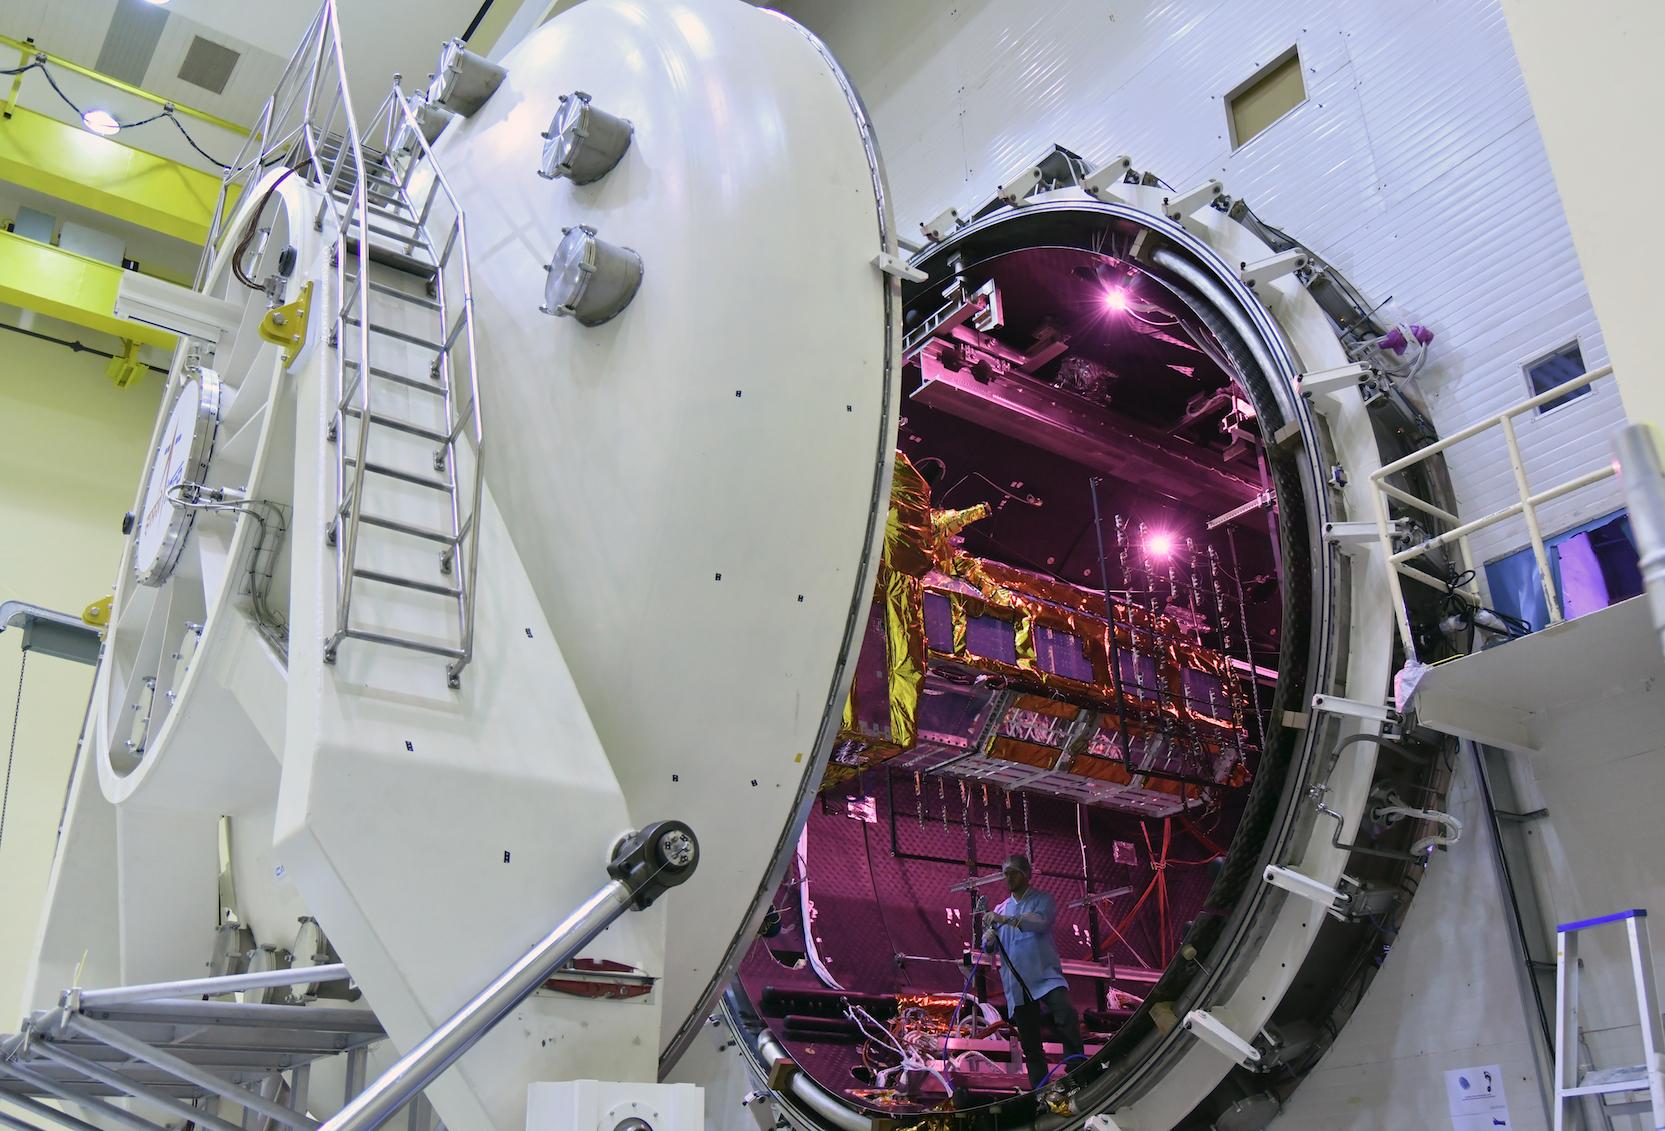 

The NISAR satellite enters the thermal vacuum chamber at an ISRO facility in Bengaluru on Oct. 19. It emerged three weeks later having met all requirements of its performance under extreme temperatures and space-like vacuum.

Credit: ISRO

Full Image Details 

